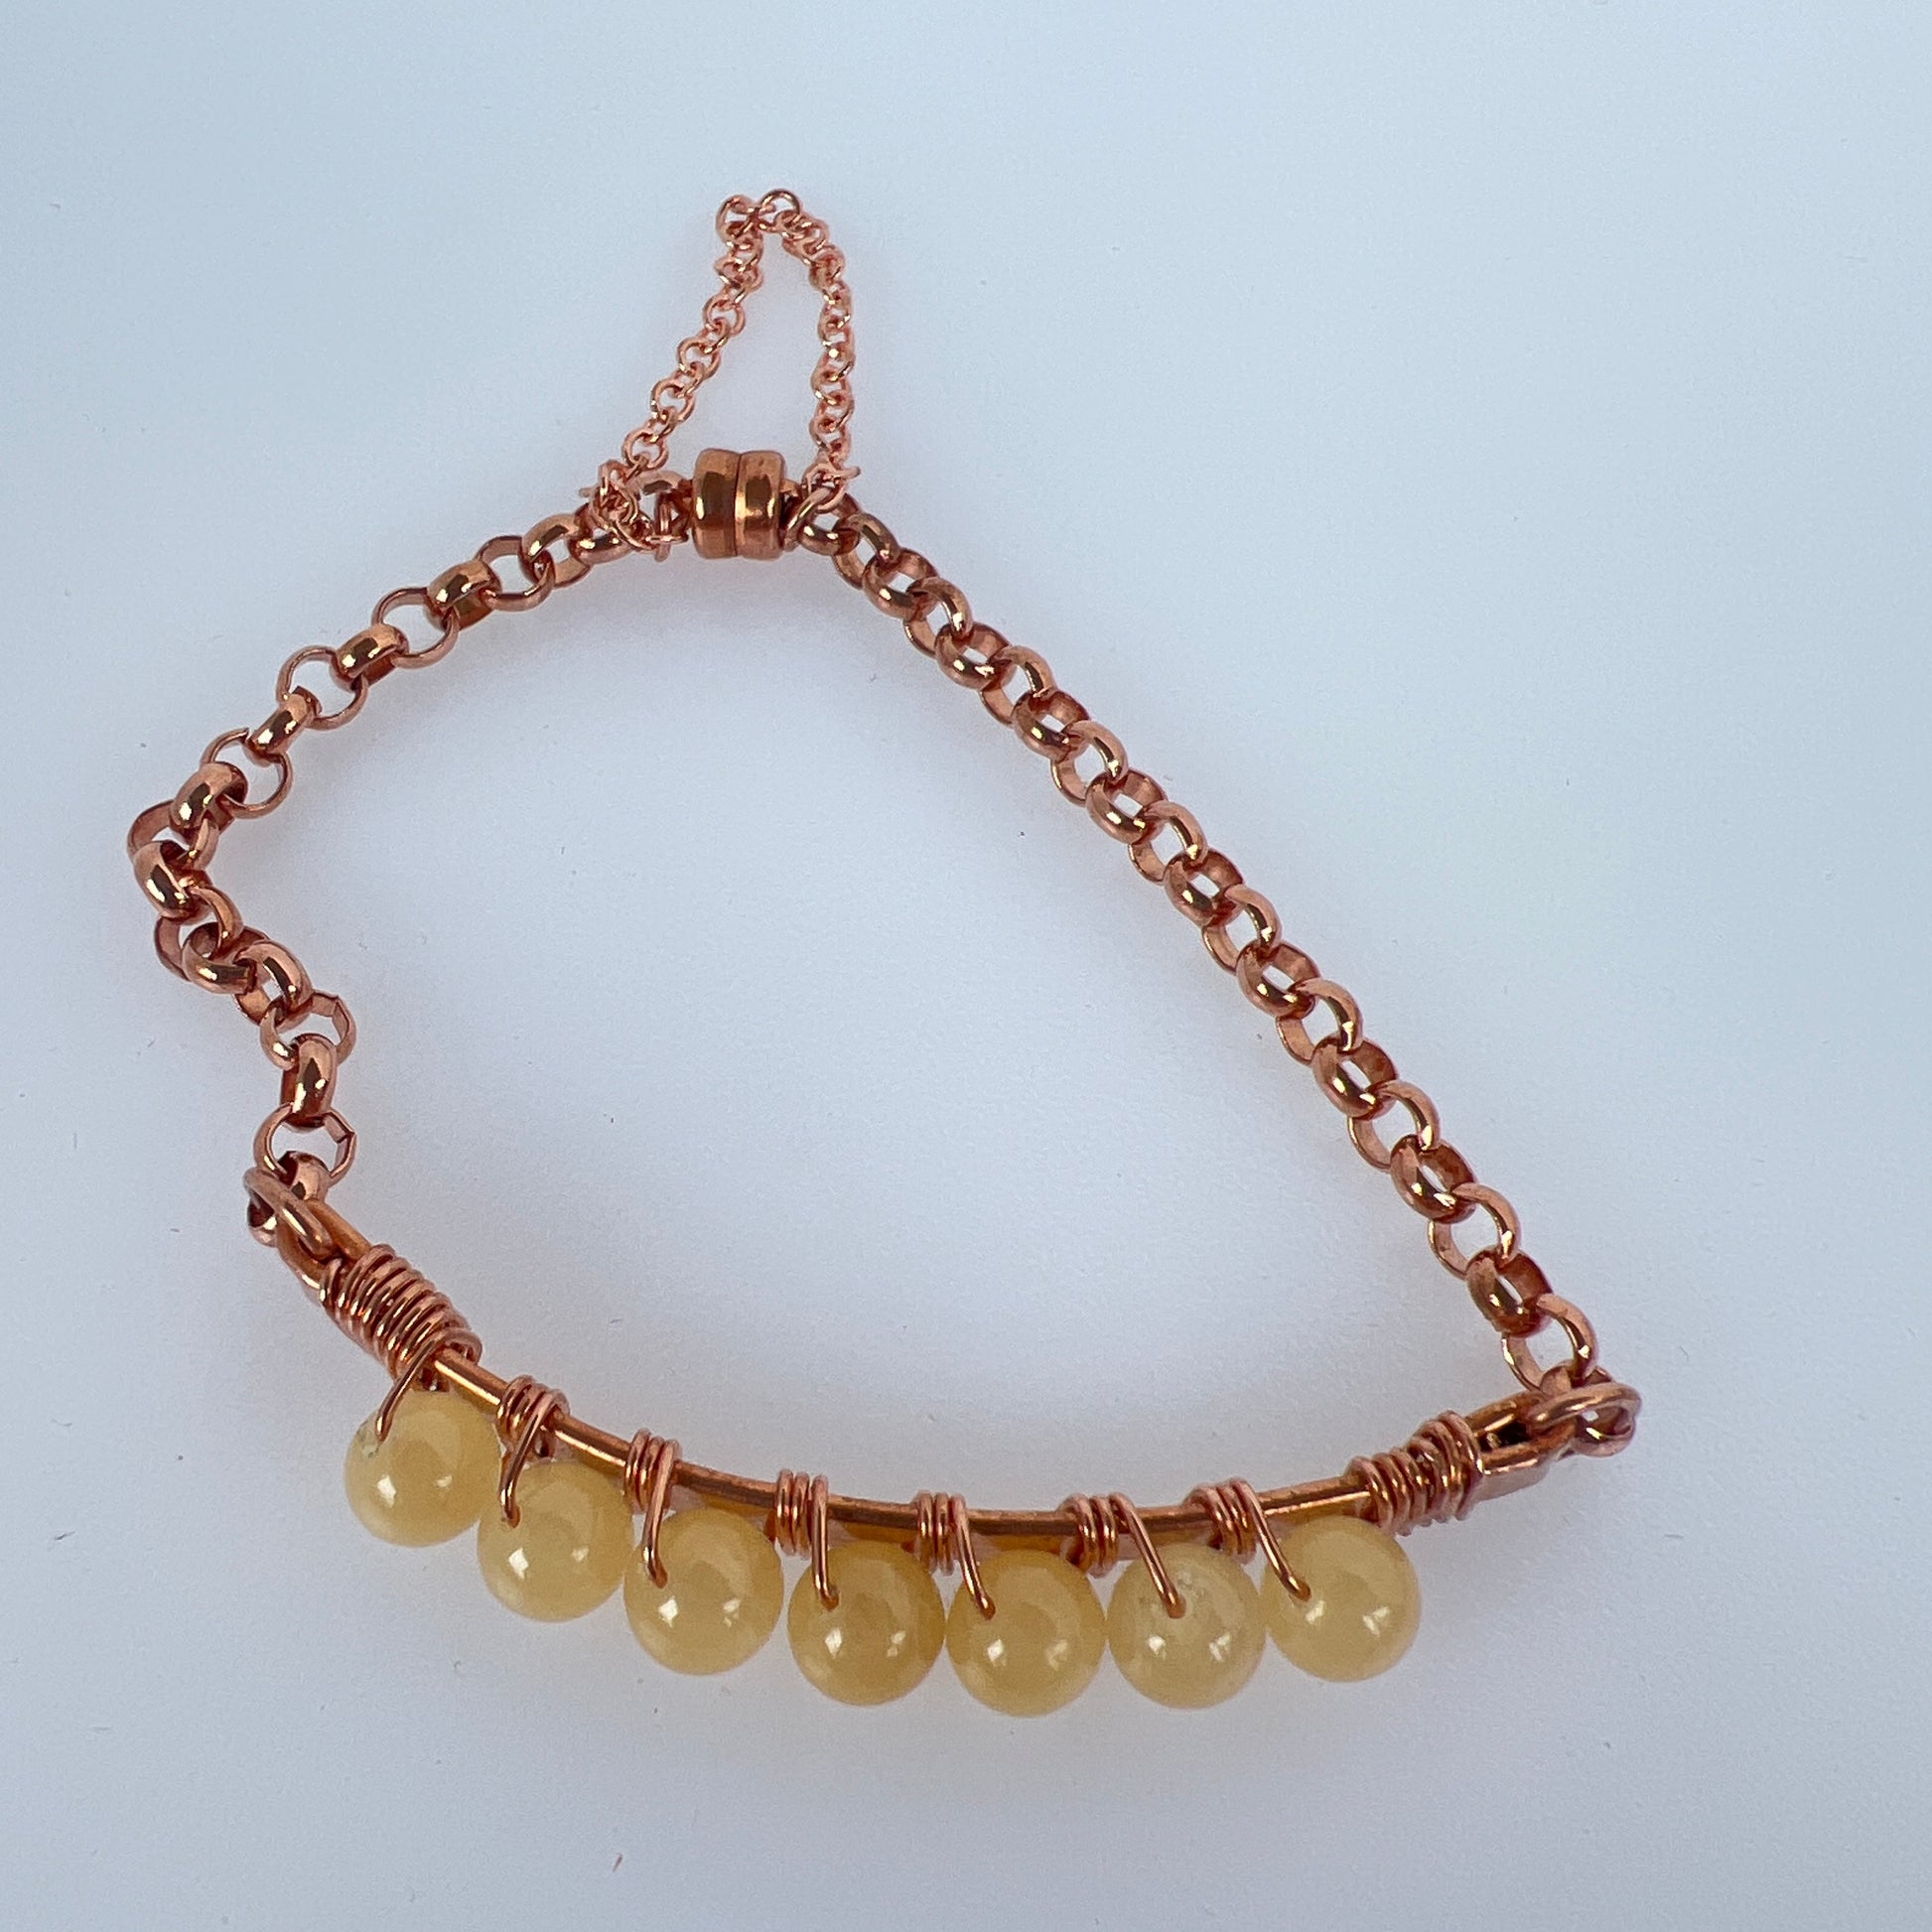 6mm yellow jade wire wrapped on copper plated and copper rolo chain finished up with copper magnet